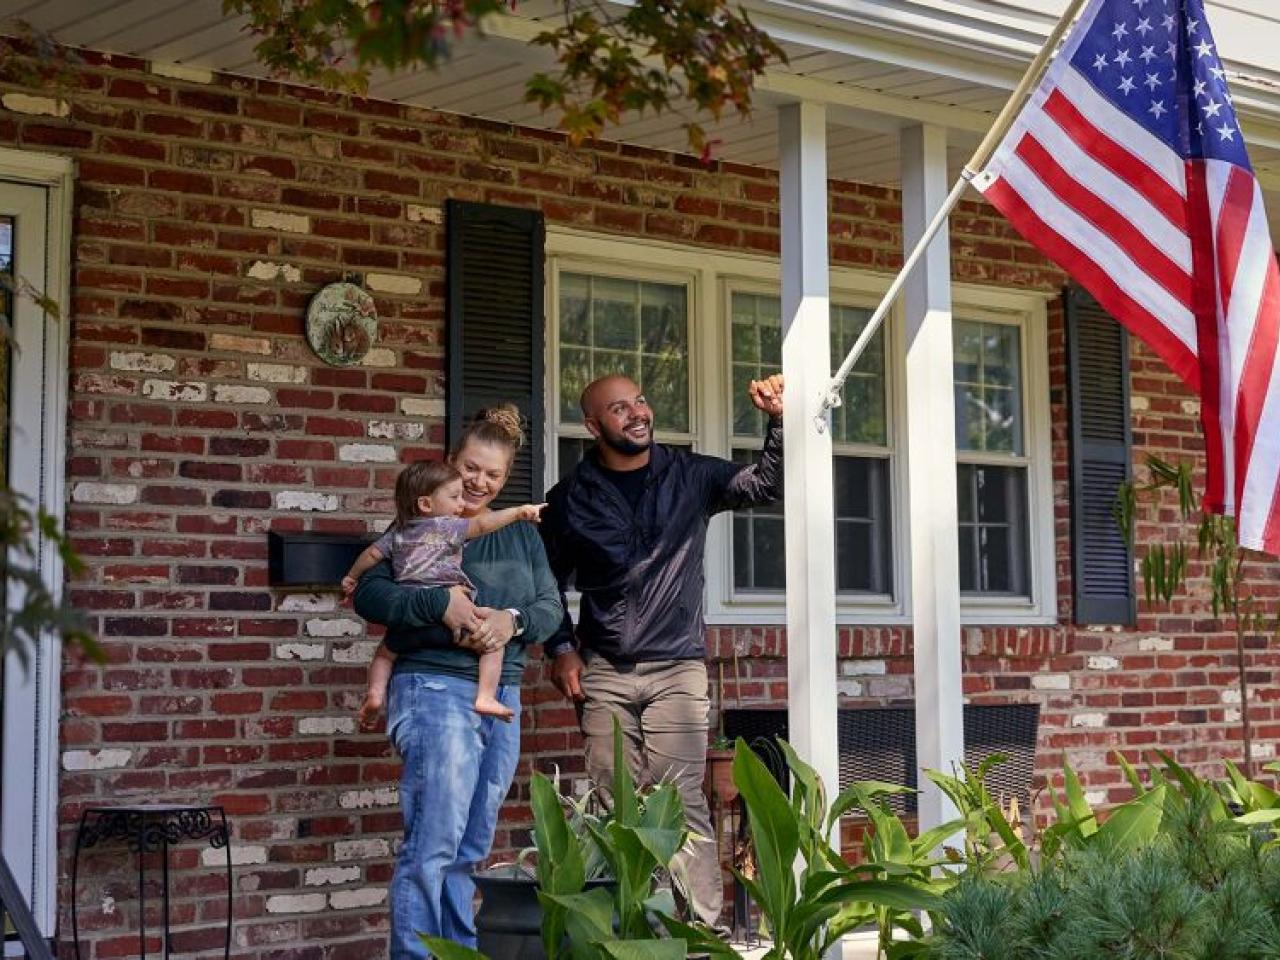 Two adults and a small child standing on a porch. An american flag in a post on the side pillar.